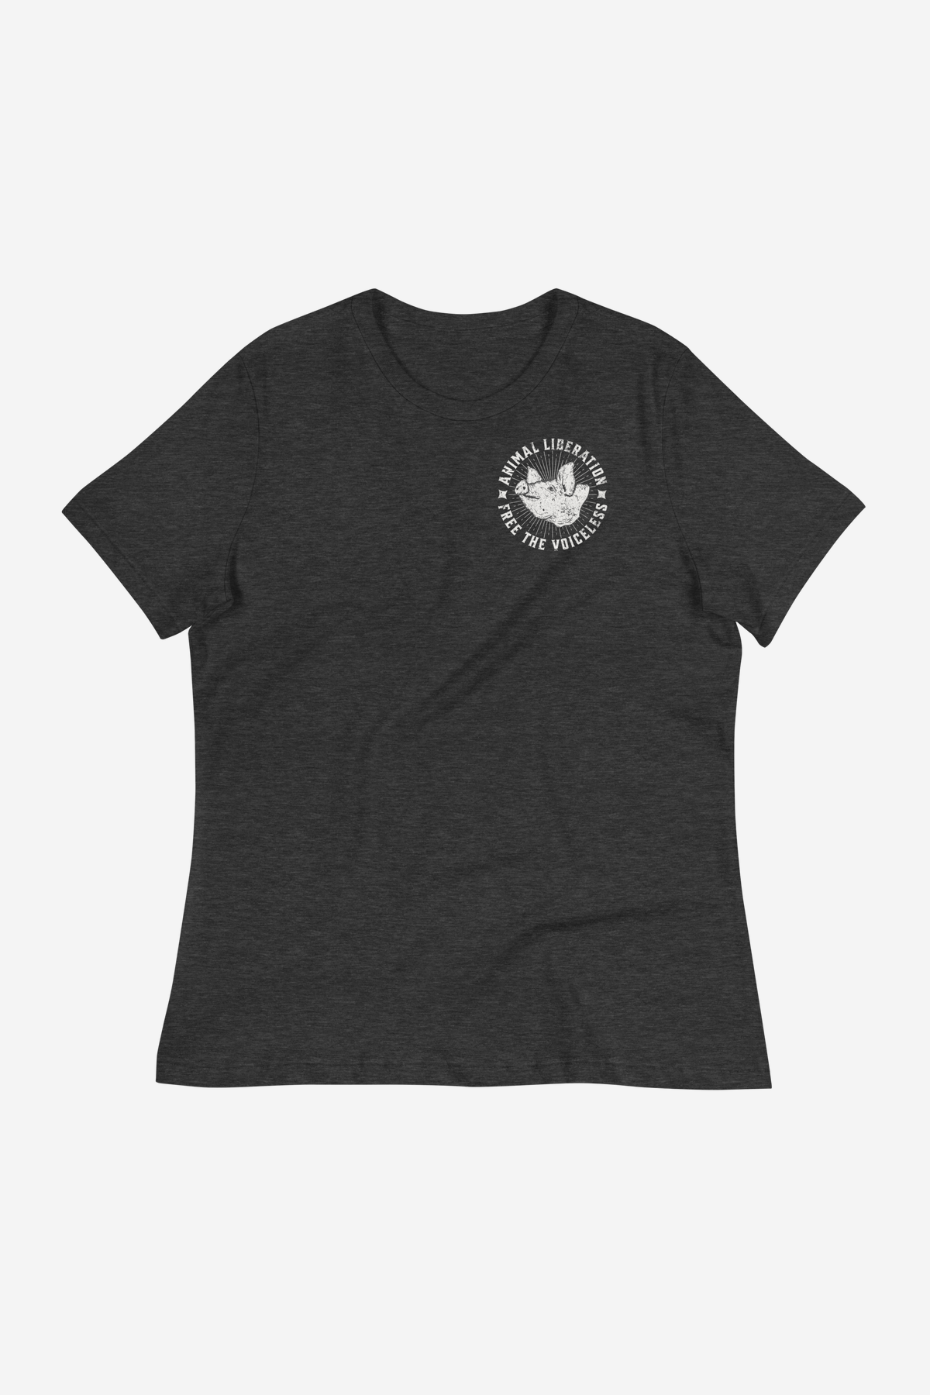 Free The Voiceless Women's Relaxed T-Shirt